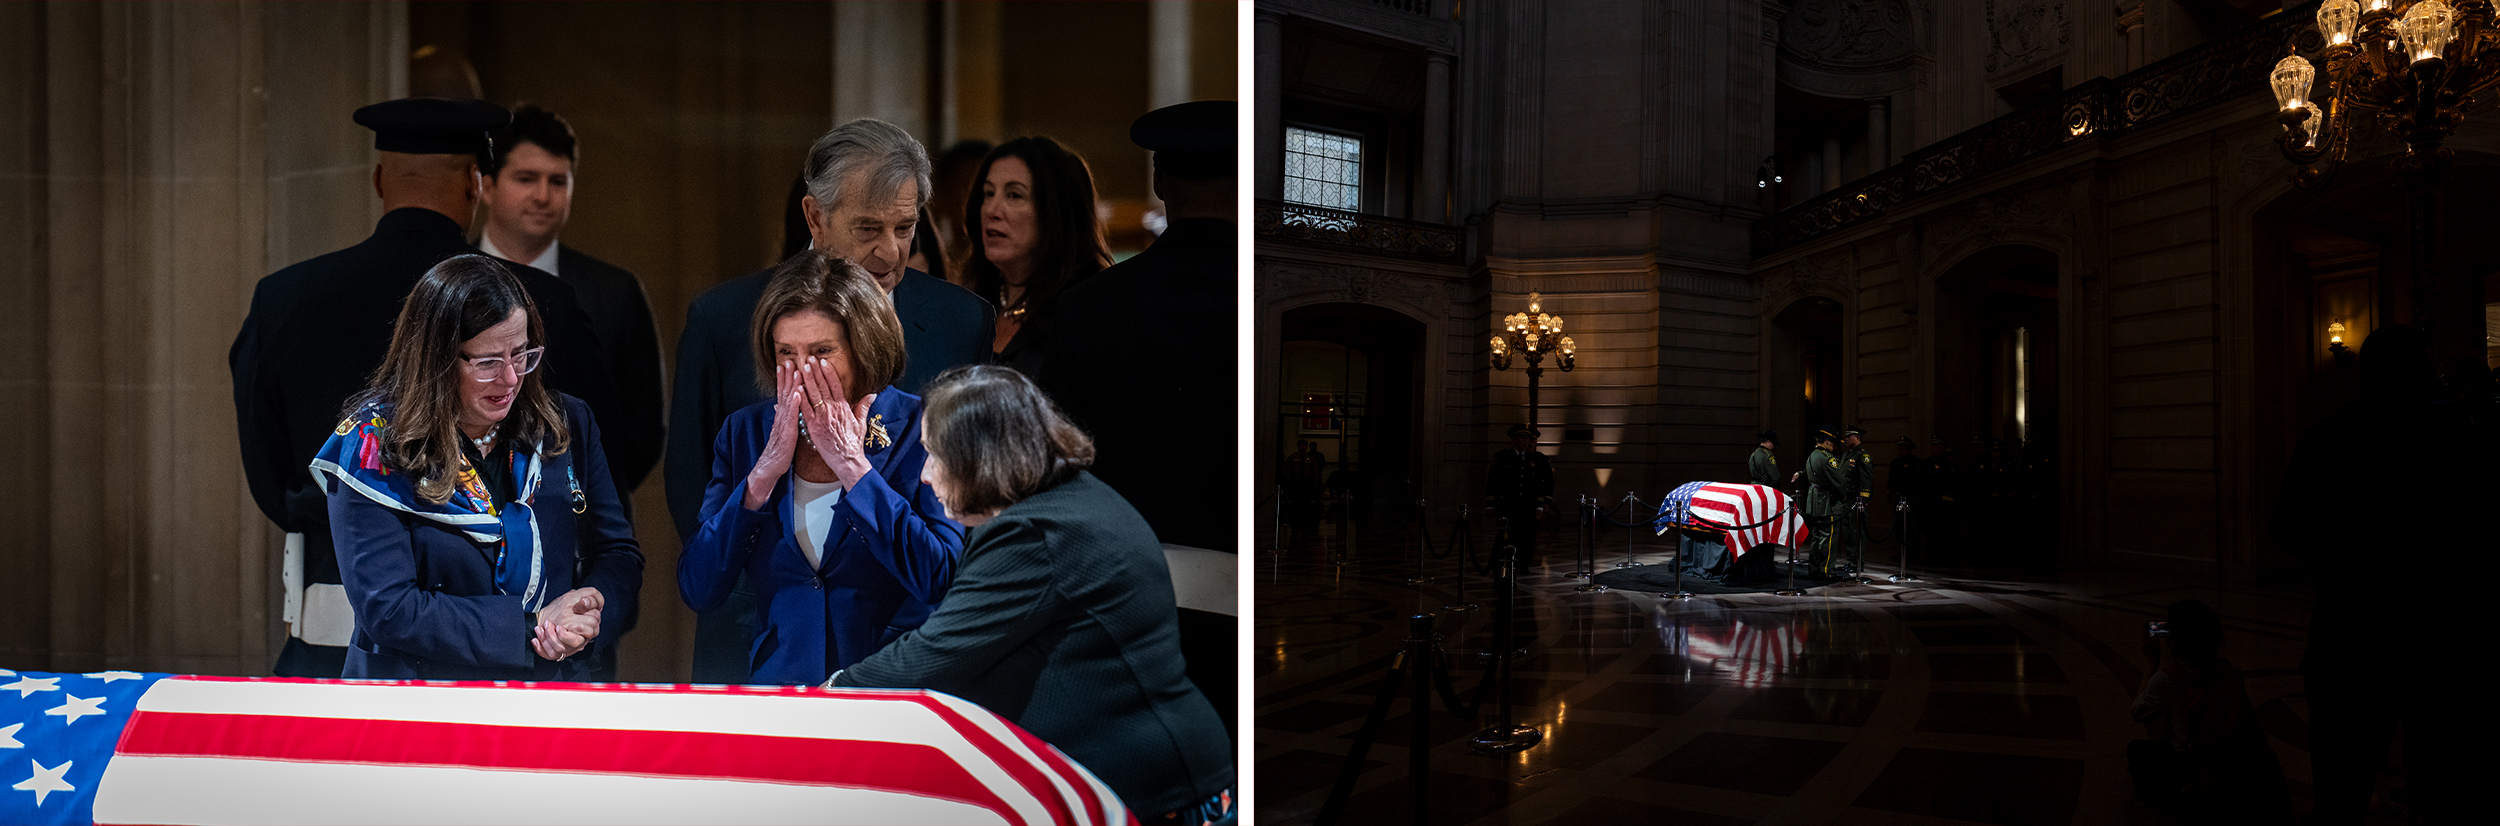 Two photos: On the left, A person in a blue sport coat cries in front of a flag-draped casket. On the right, a flag draped casket in a large darkened room.